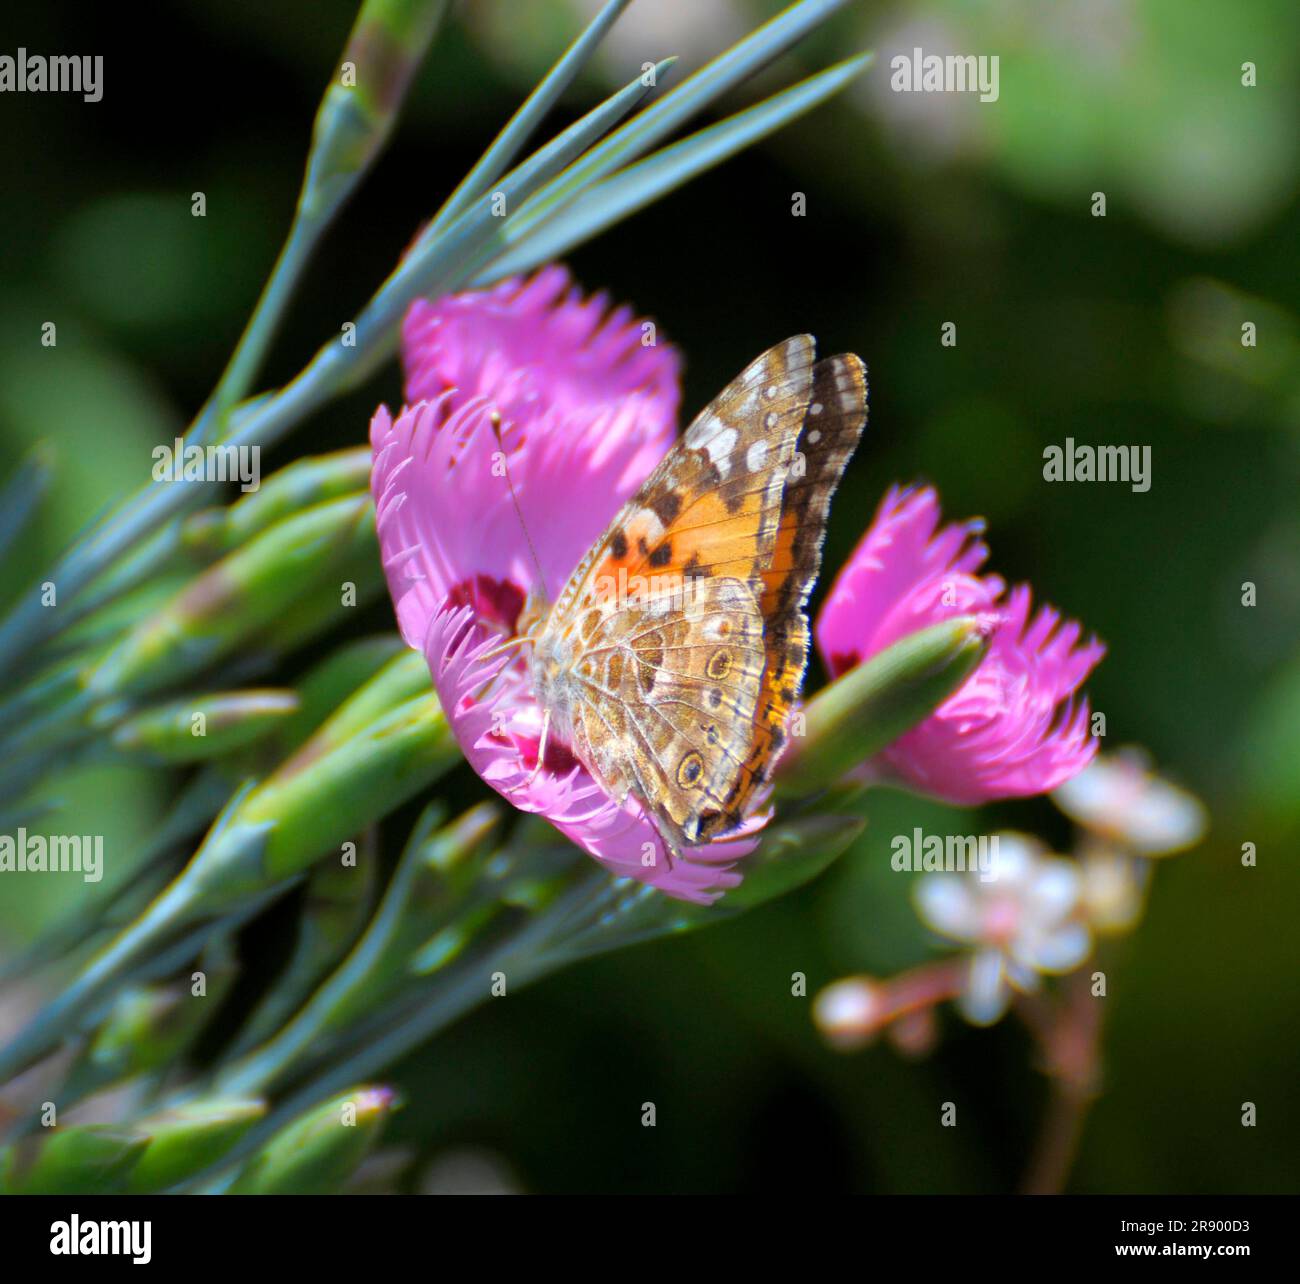 Painted lady (Vanessa cardui), Thistle butterfly on carnation (Dianthus) flower, Empress carnation, Heddewig carnation, Chinese carnation chinensis Stock Photo